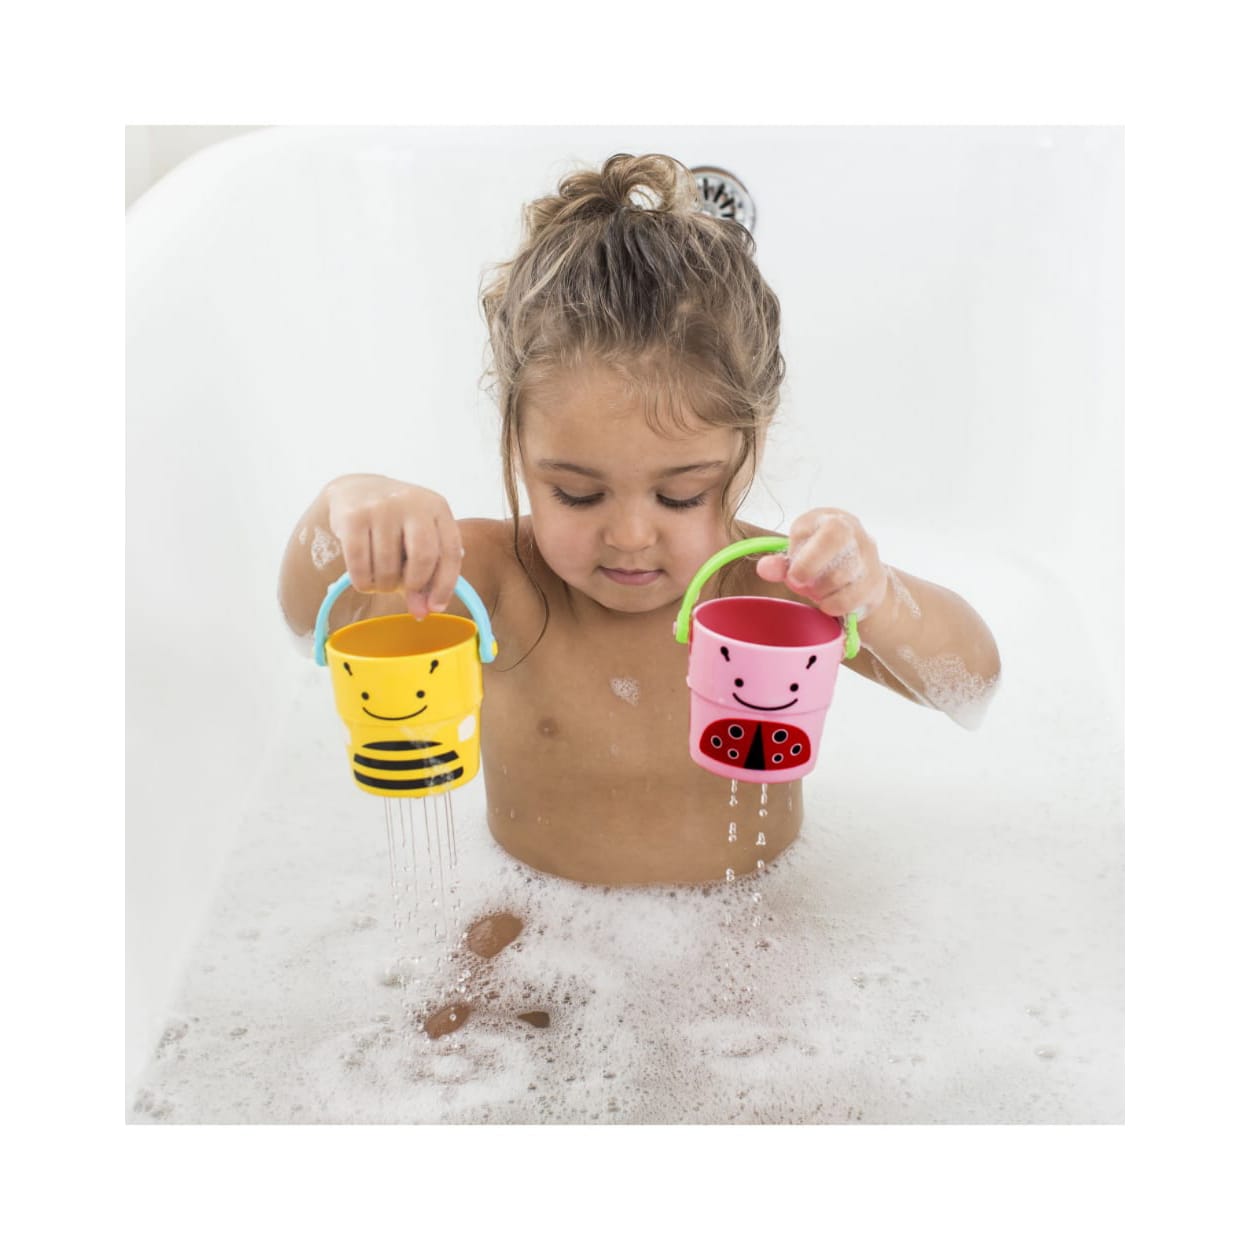 Stack Band Pour Bucket Bath Toy For Toddlers Development